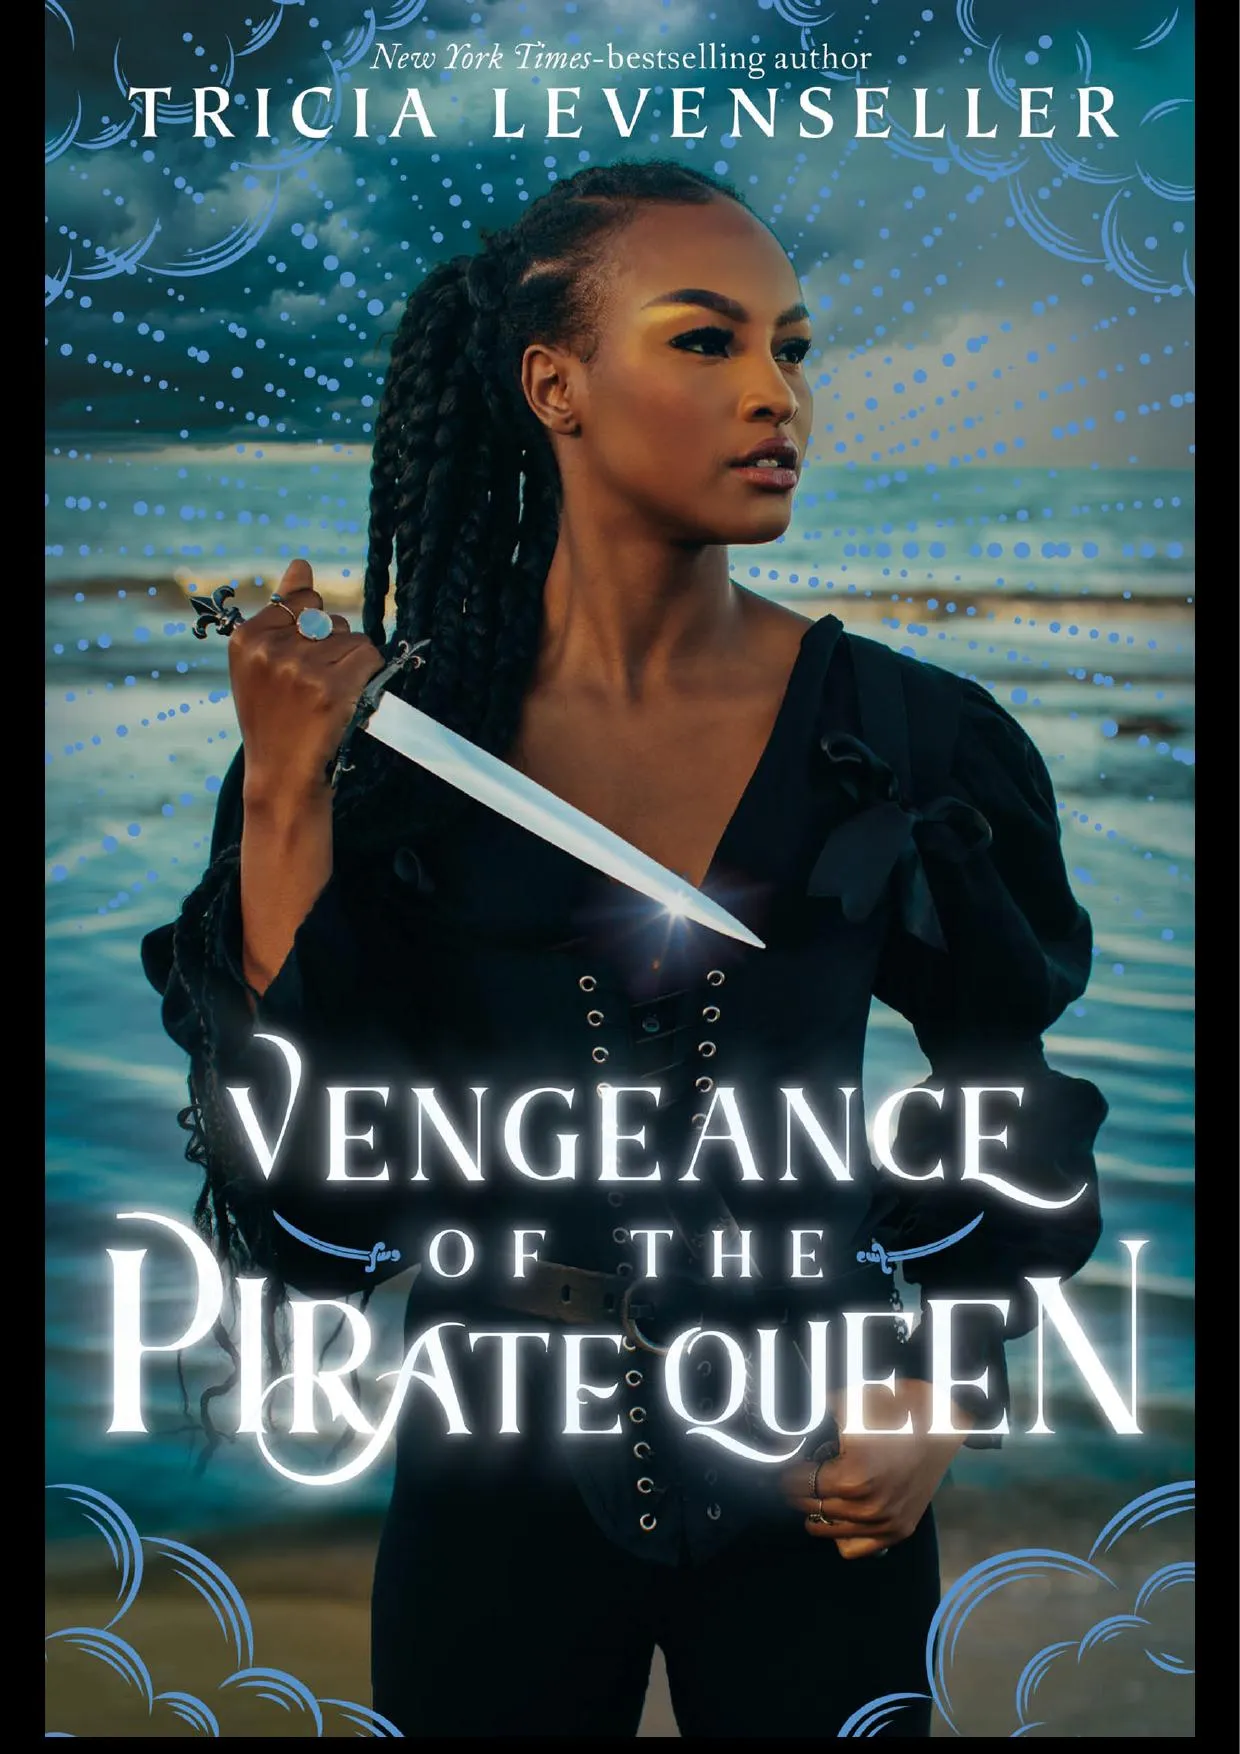 Vengeance of the Pirate Queen (Daughter of the Pirate King #3)